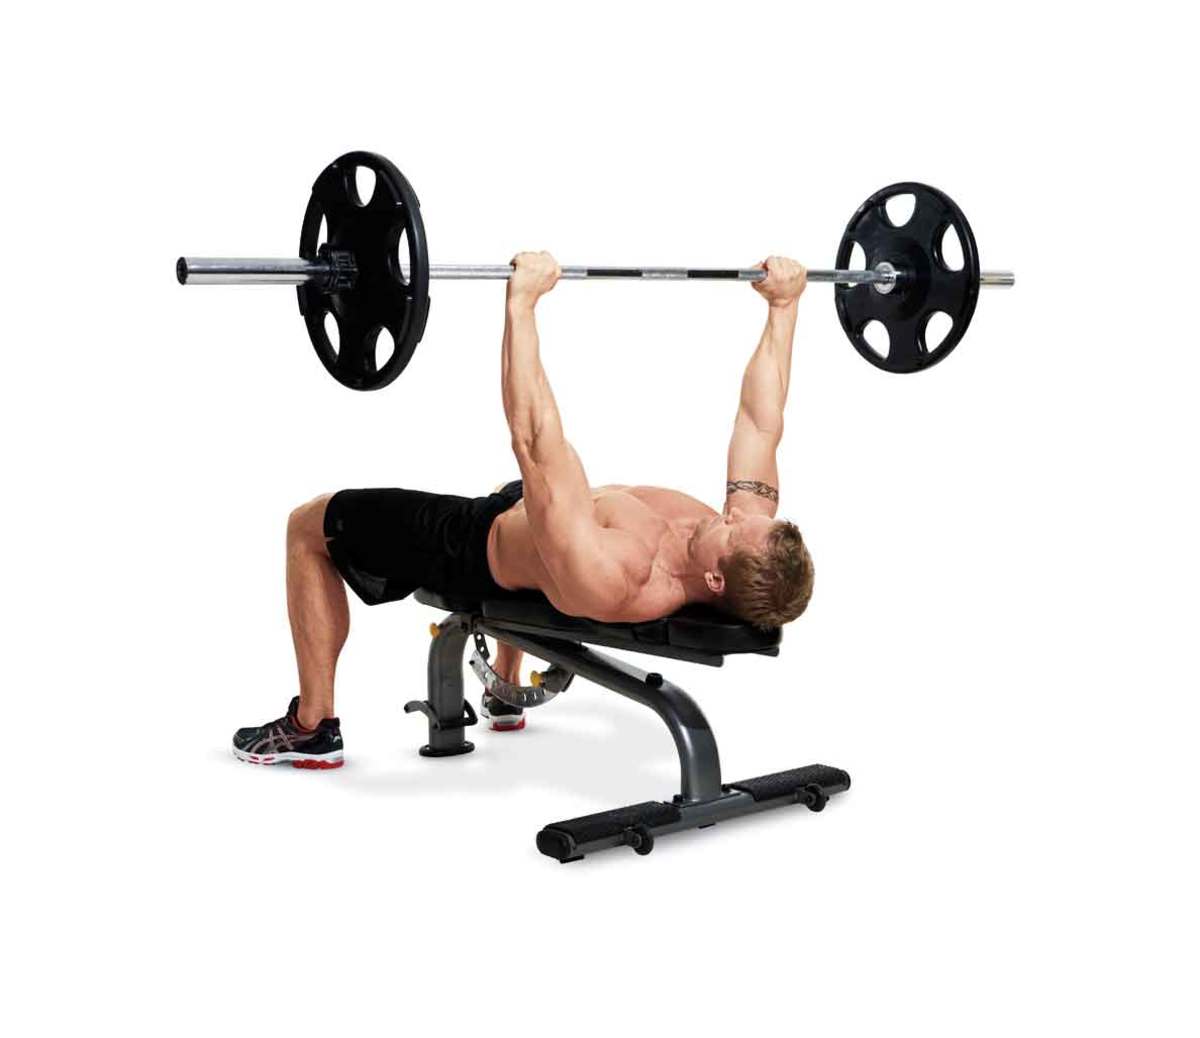 Bench Press Like the Pros by Avoiding These Rookie Mistakes - Men's Journal